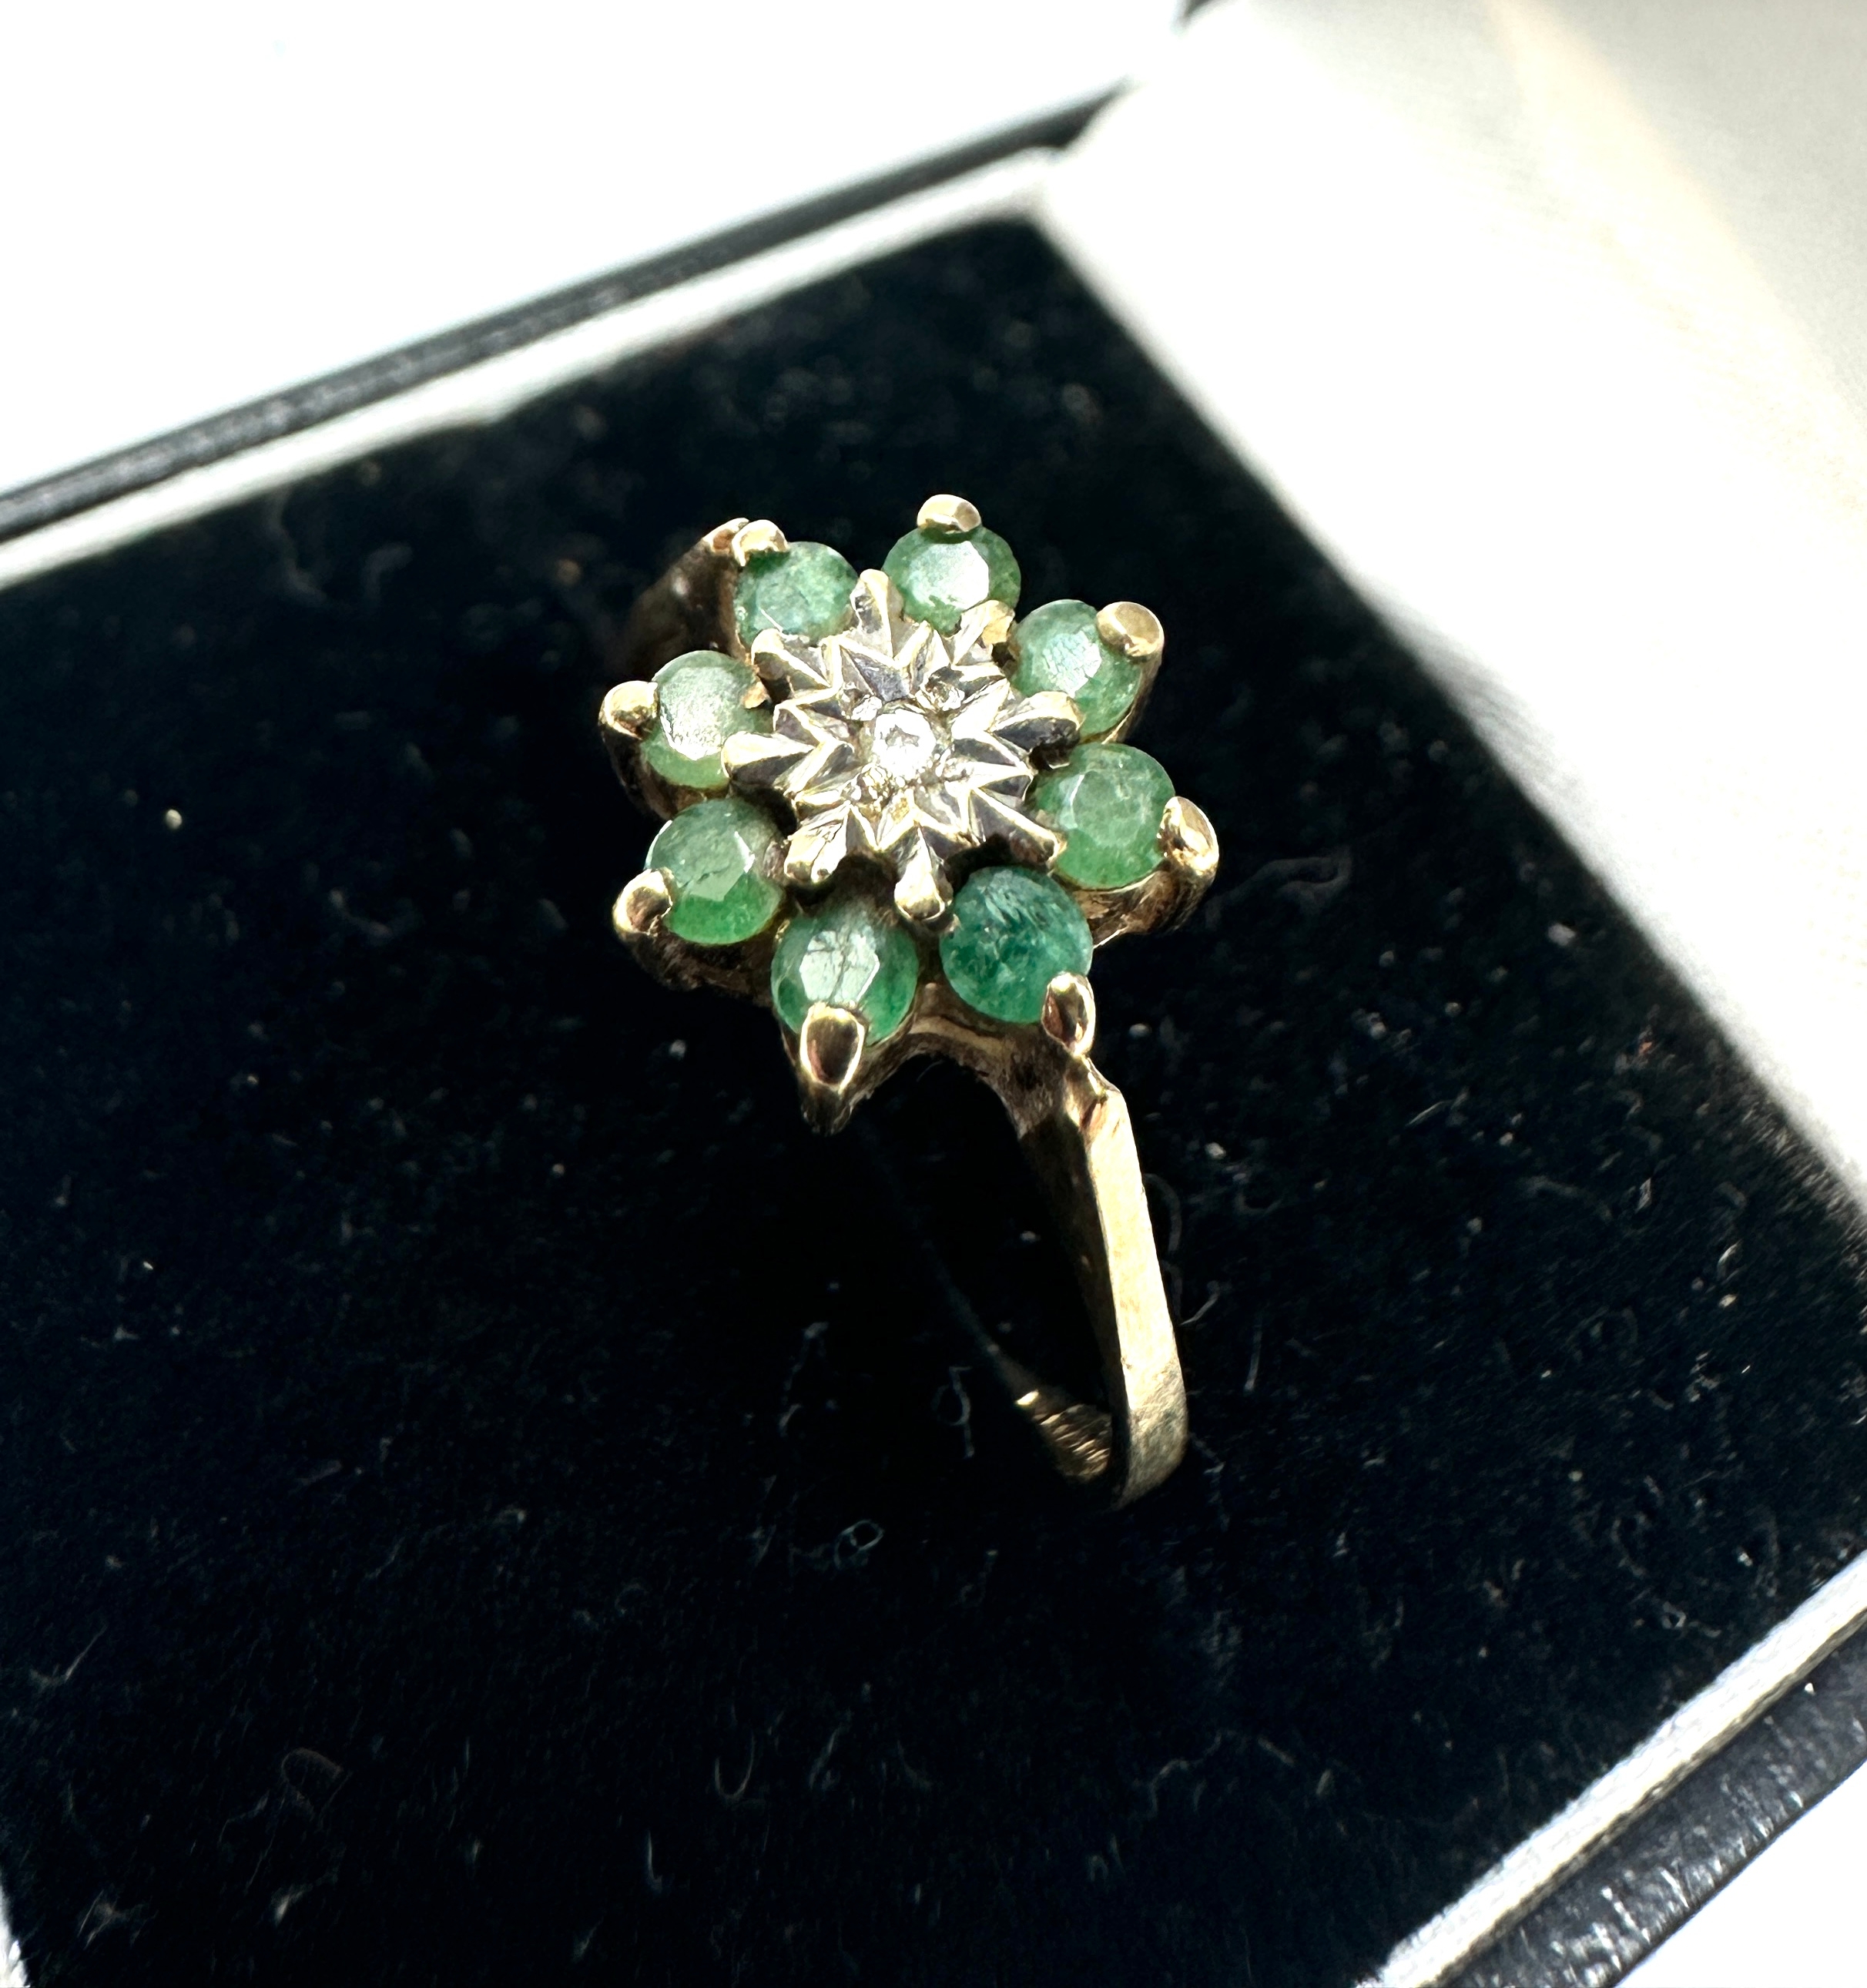 9ct gold diamond & emerald ring weight 1.9g - Image 3 of 4